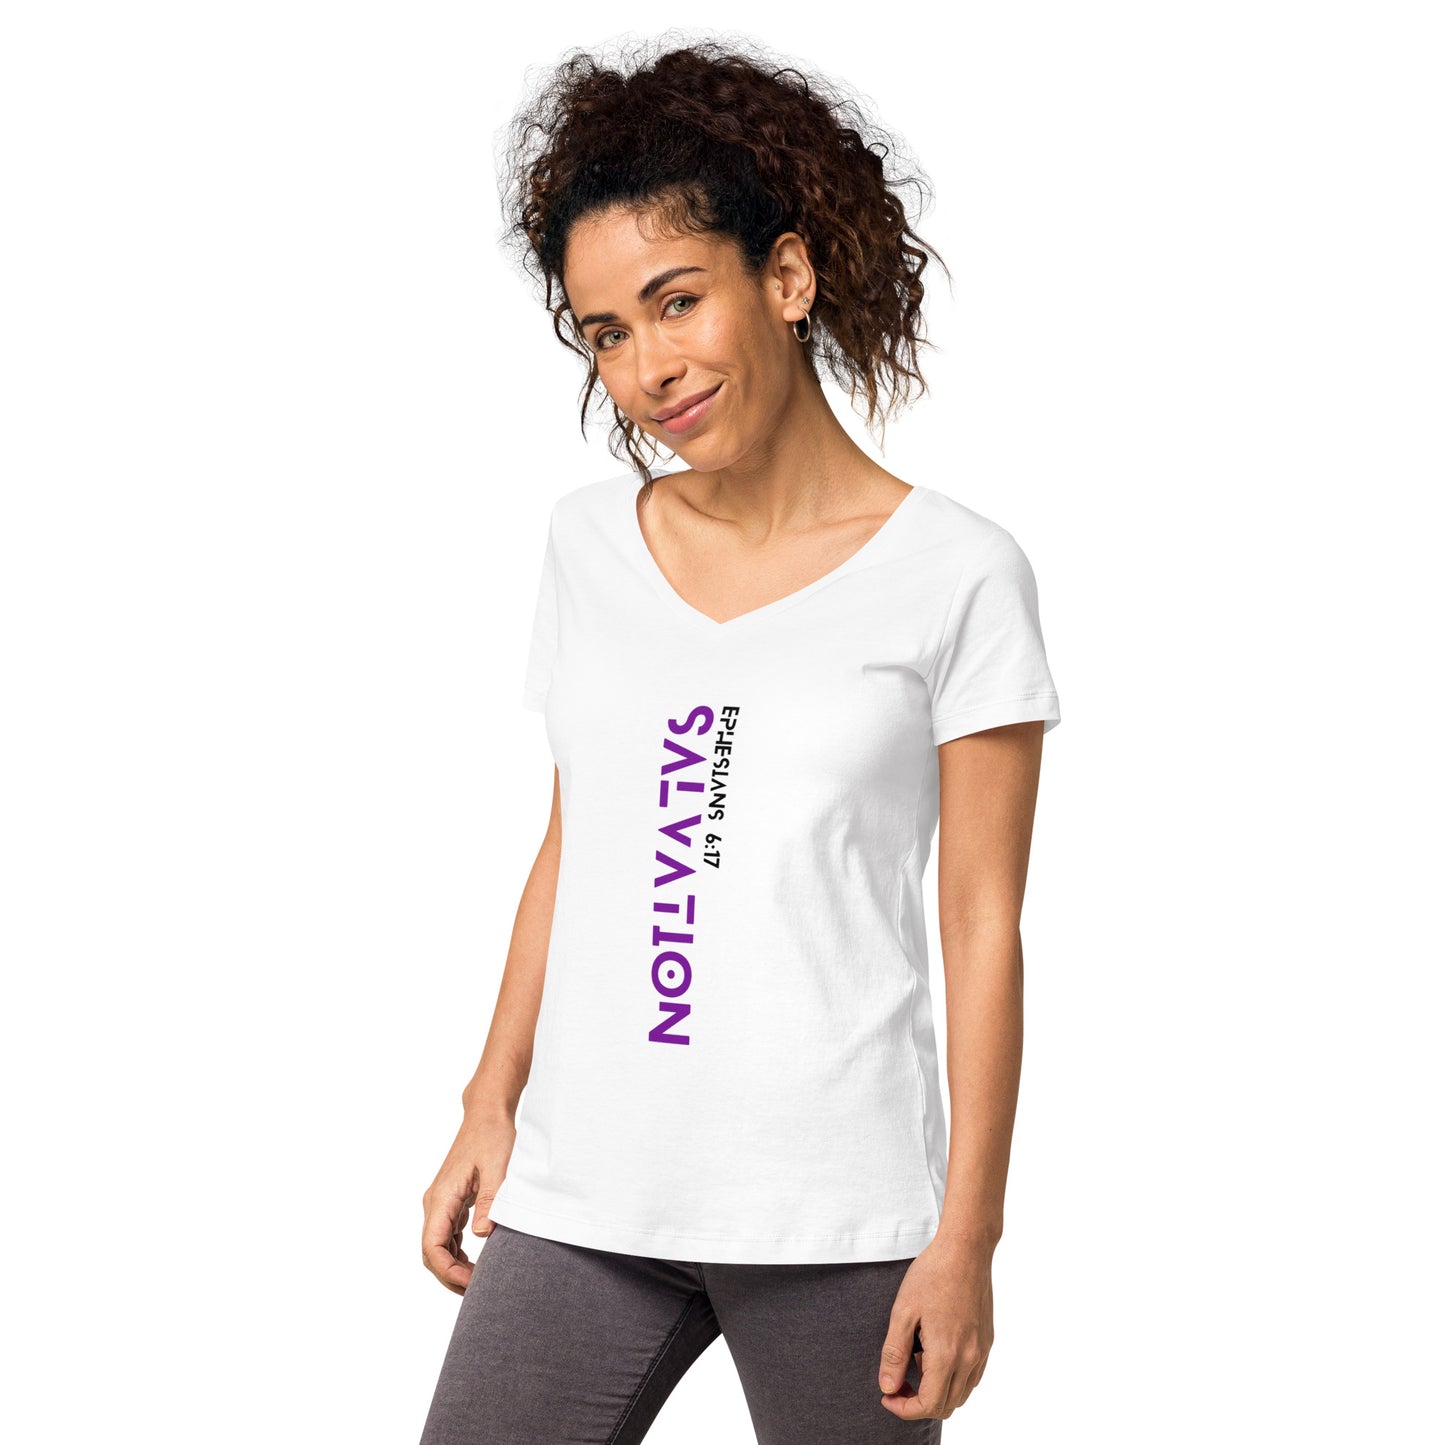 Salvation Women’s fitted v-neck t-shirt